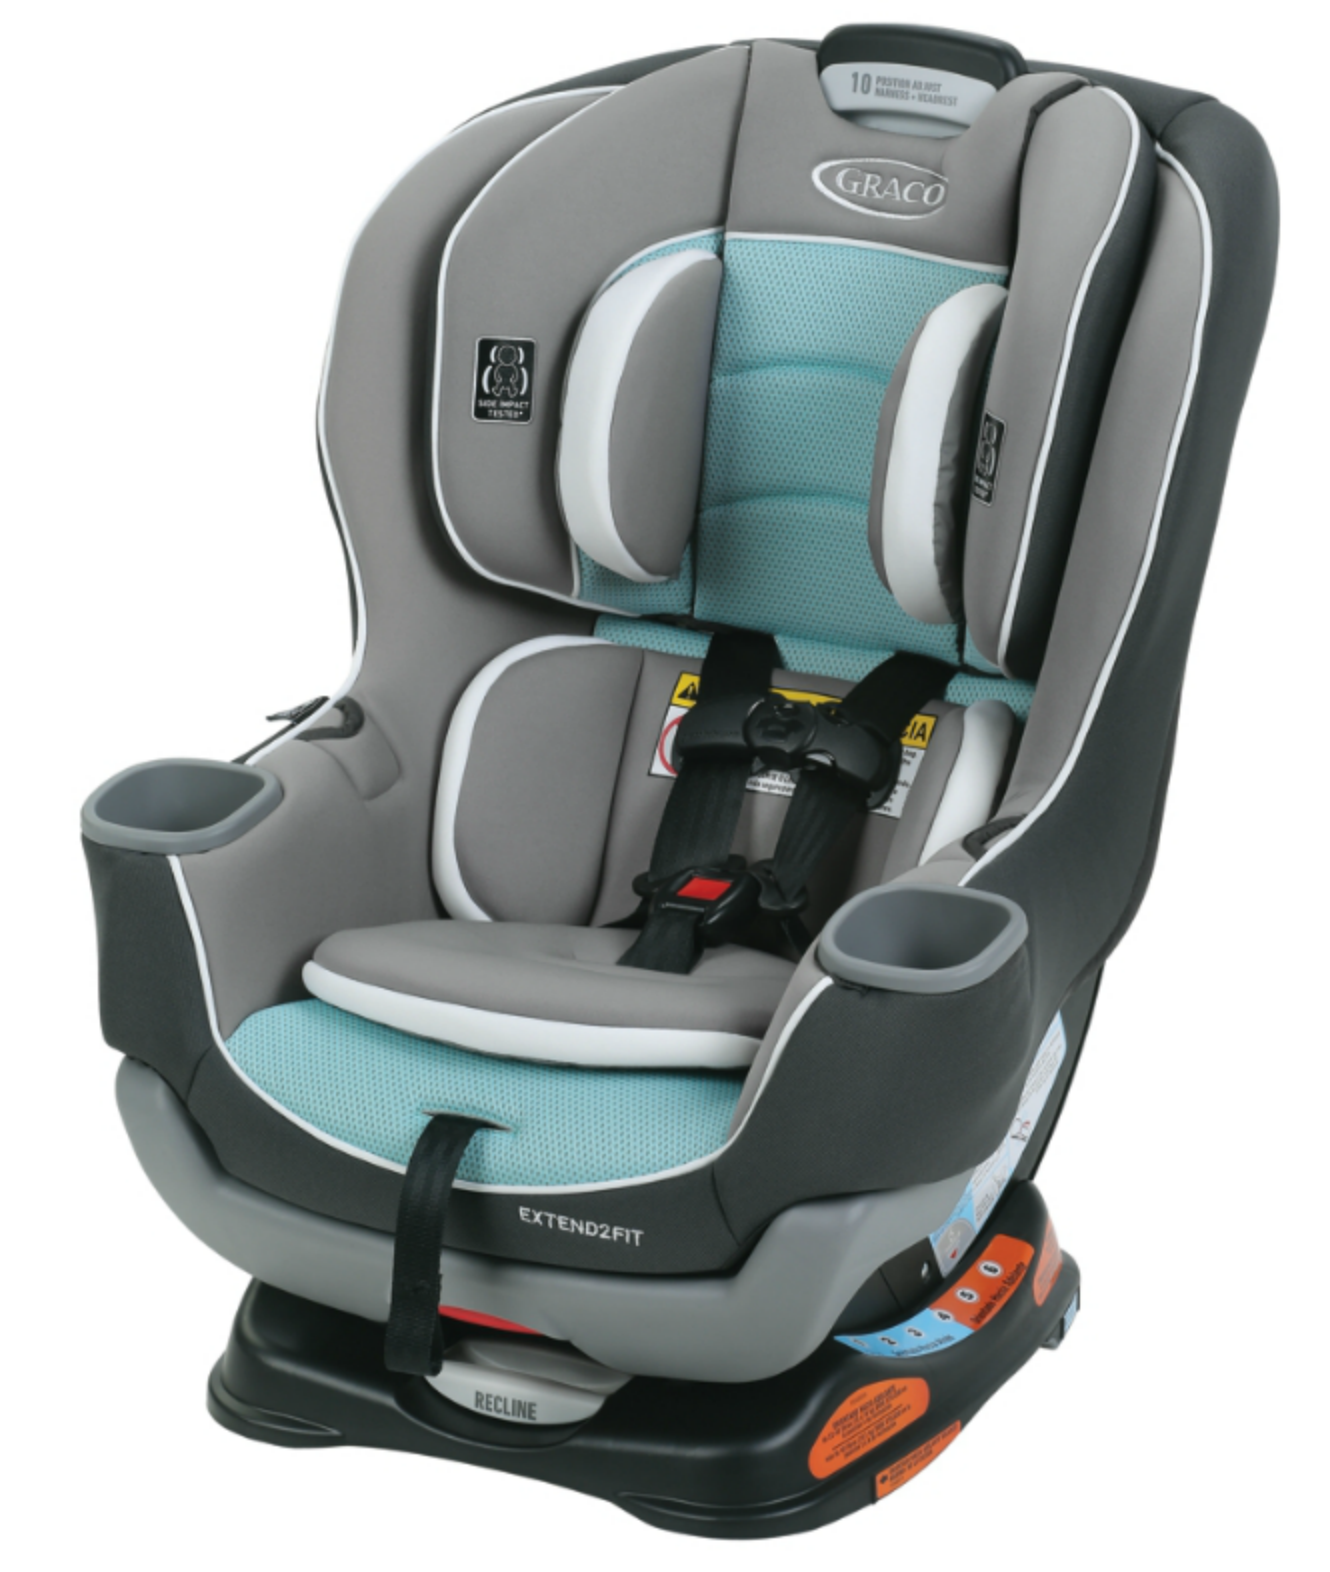 graco extend2fit base